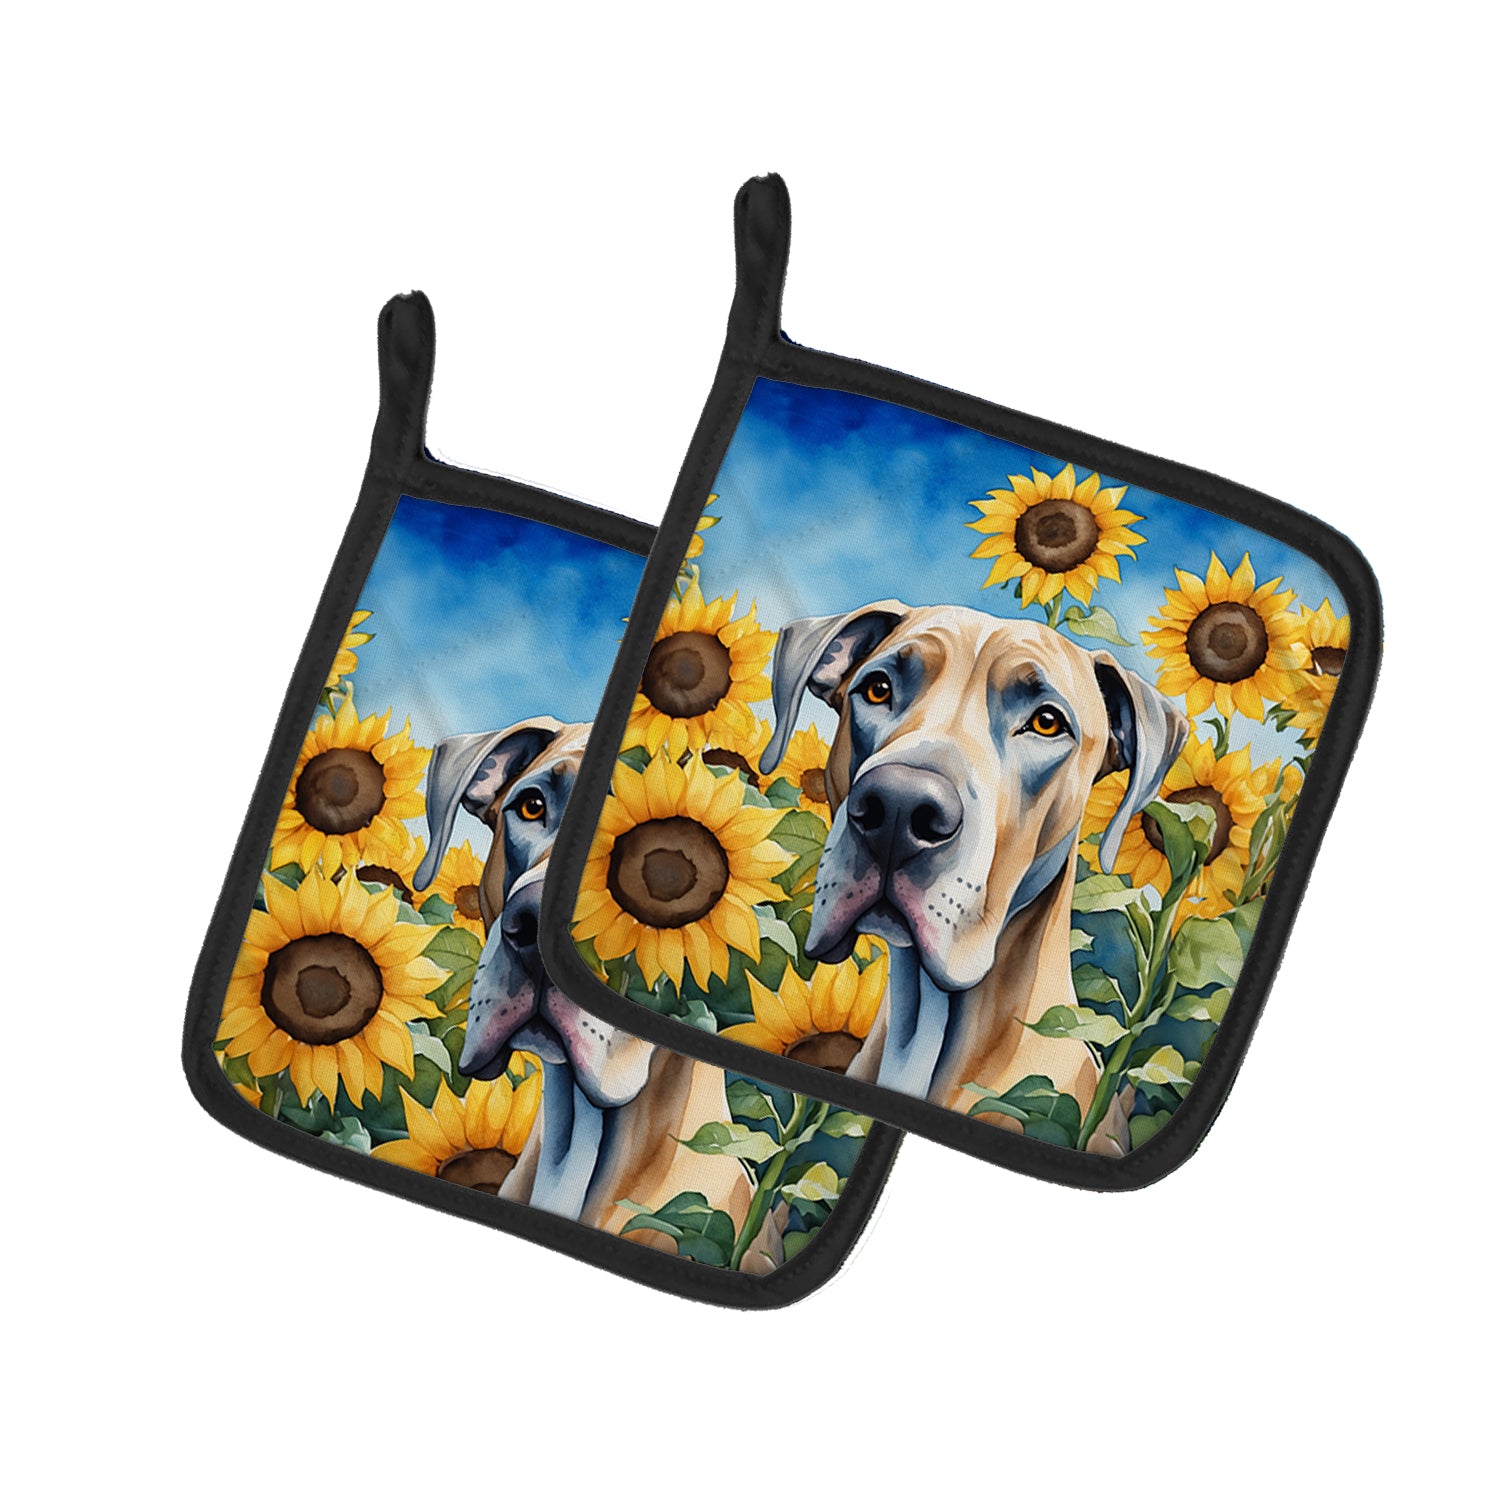 Buy this Great Dane in Sunflowers Pair of Pot Holders